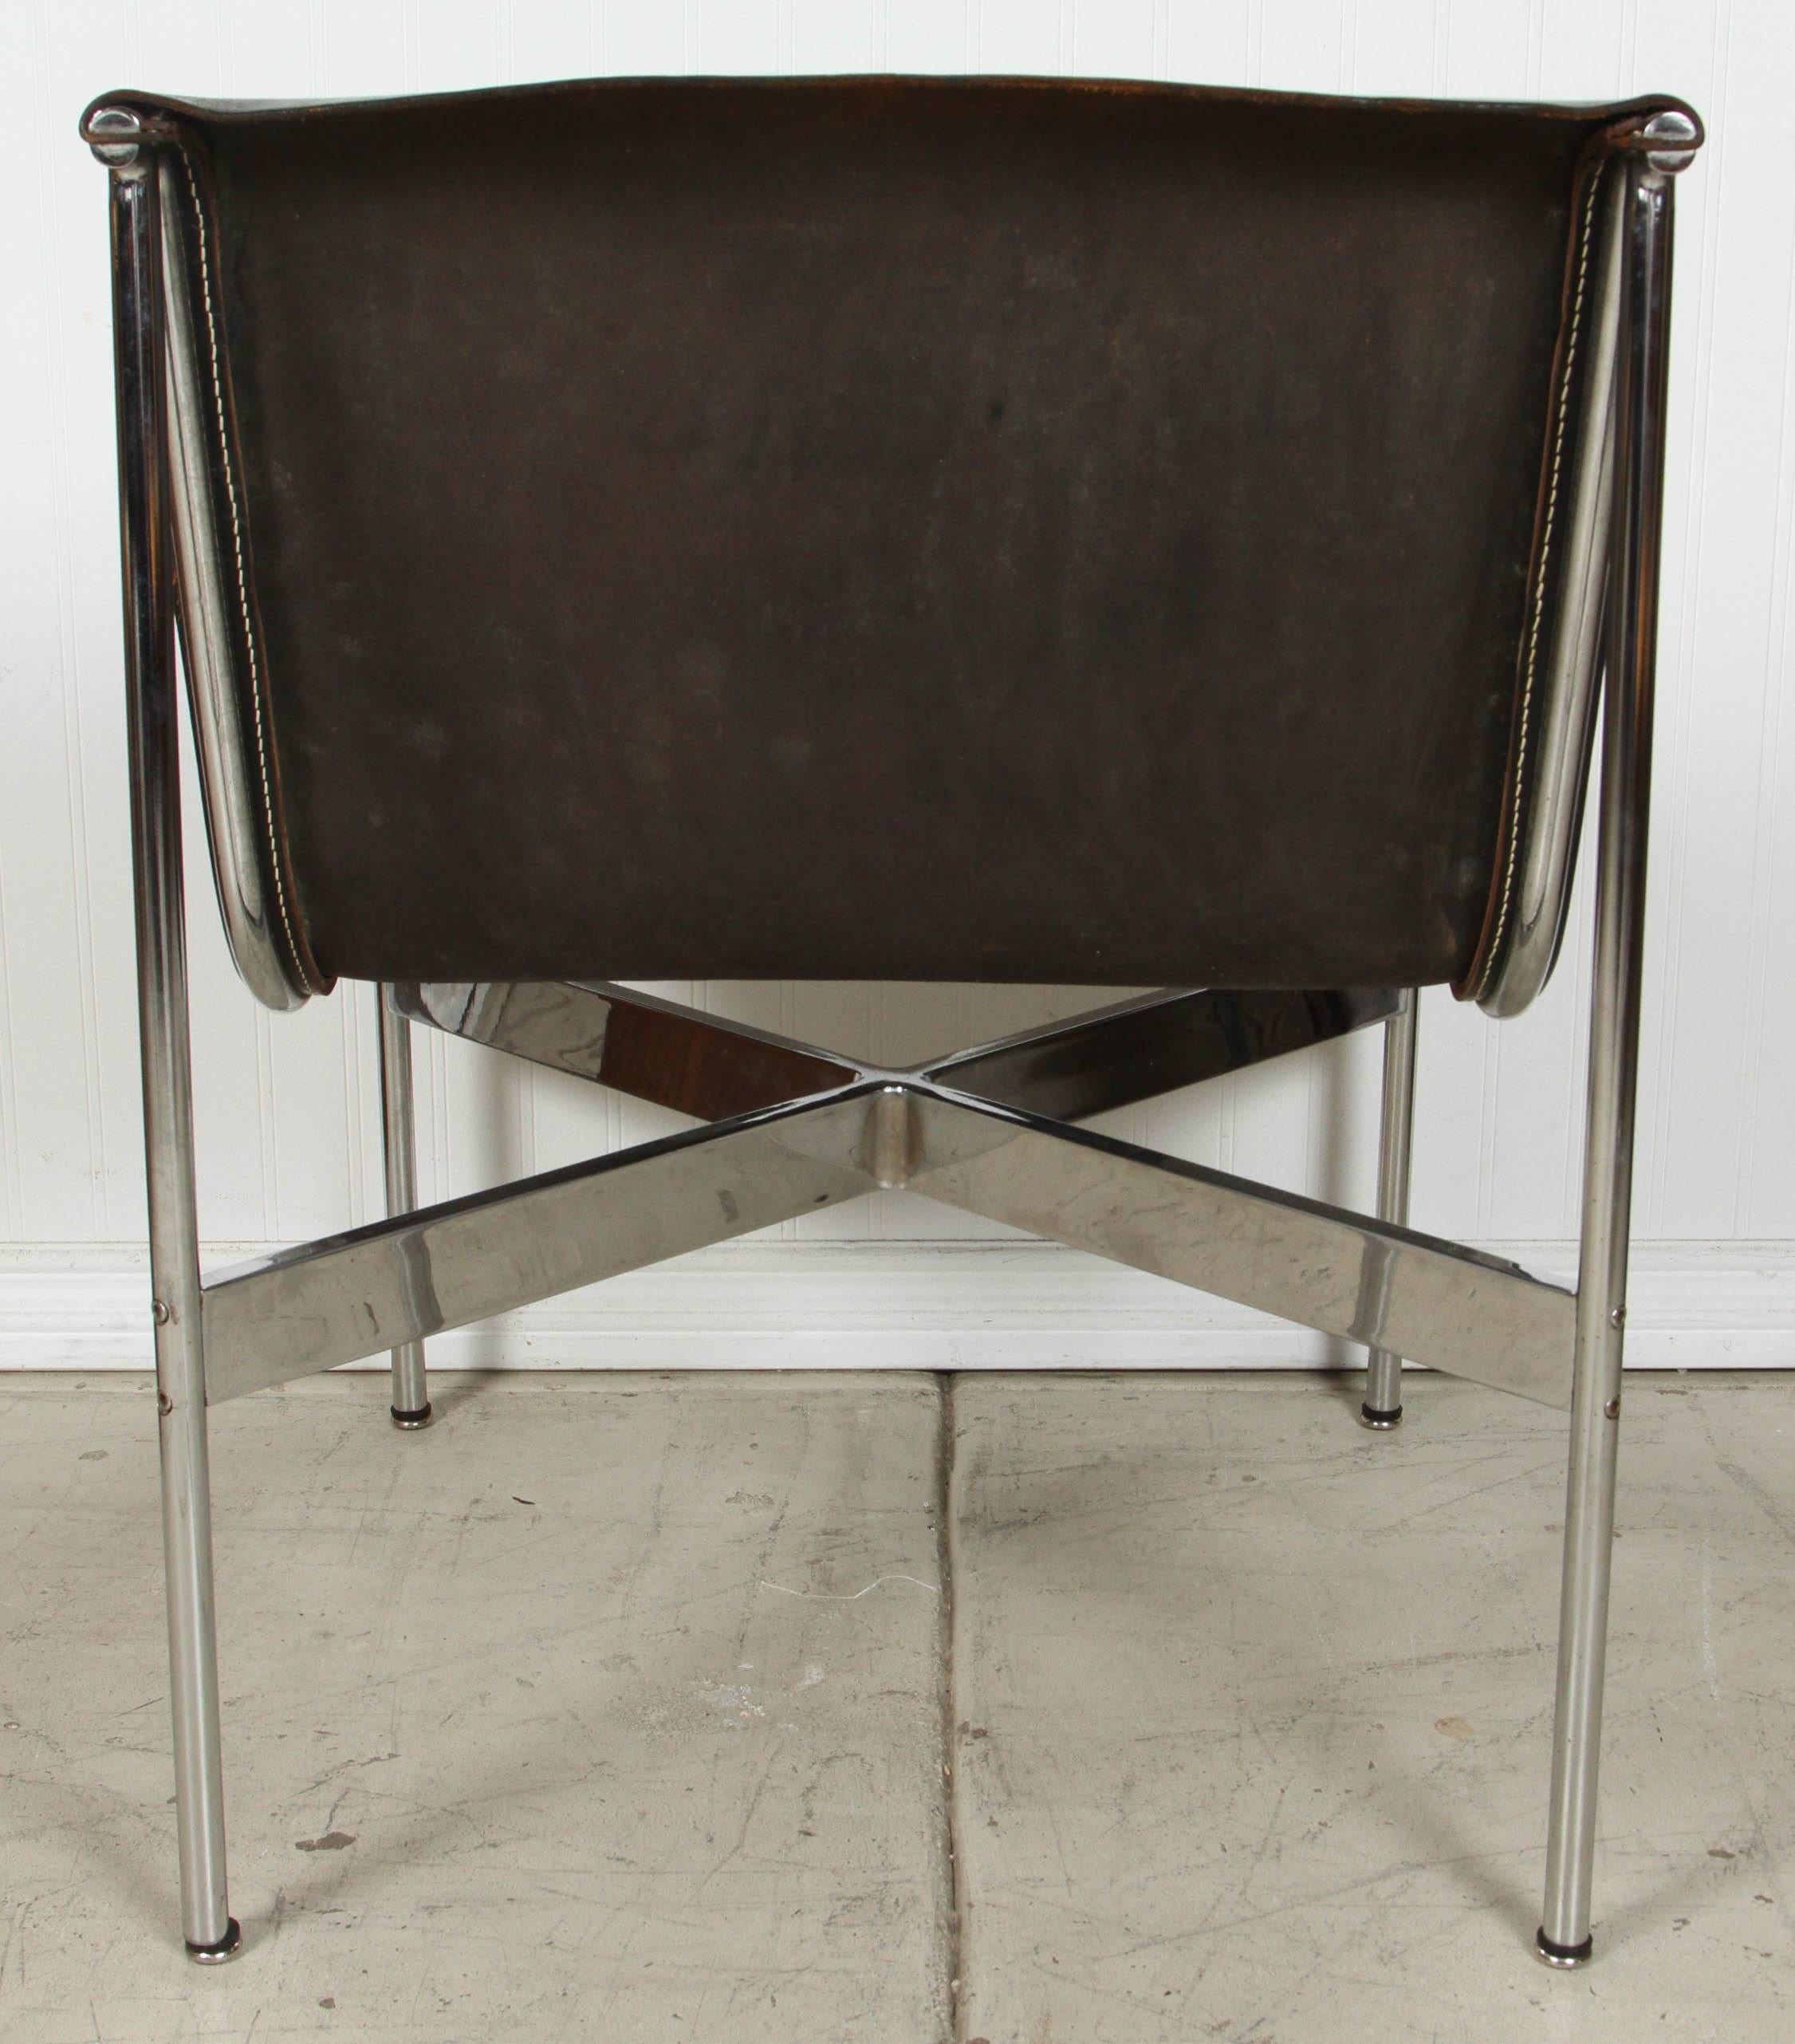 Chrome Pair of Leather and chrome chairs by Katavalos, Littell, and Kelly